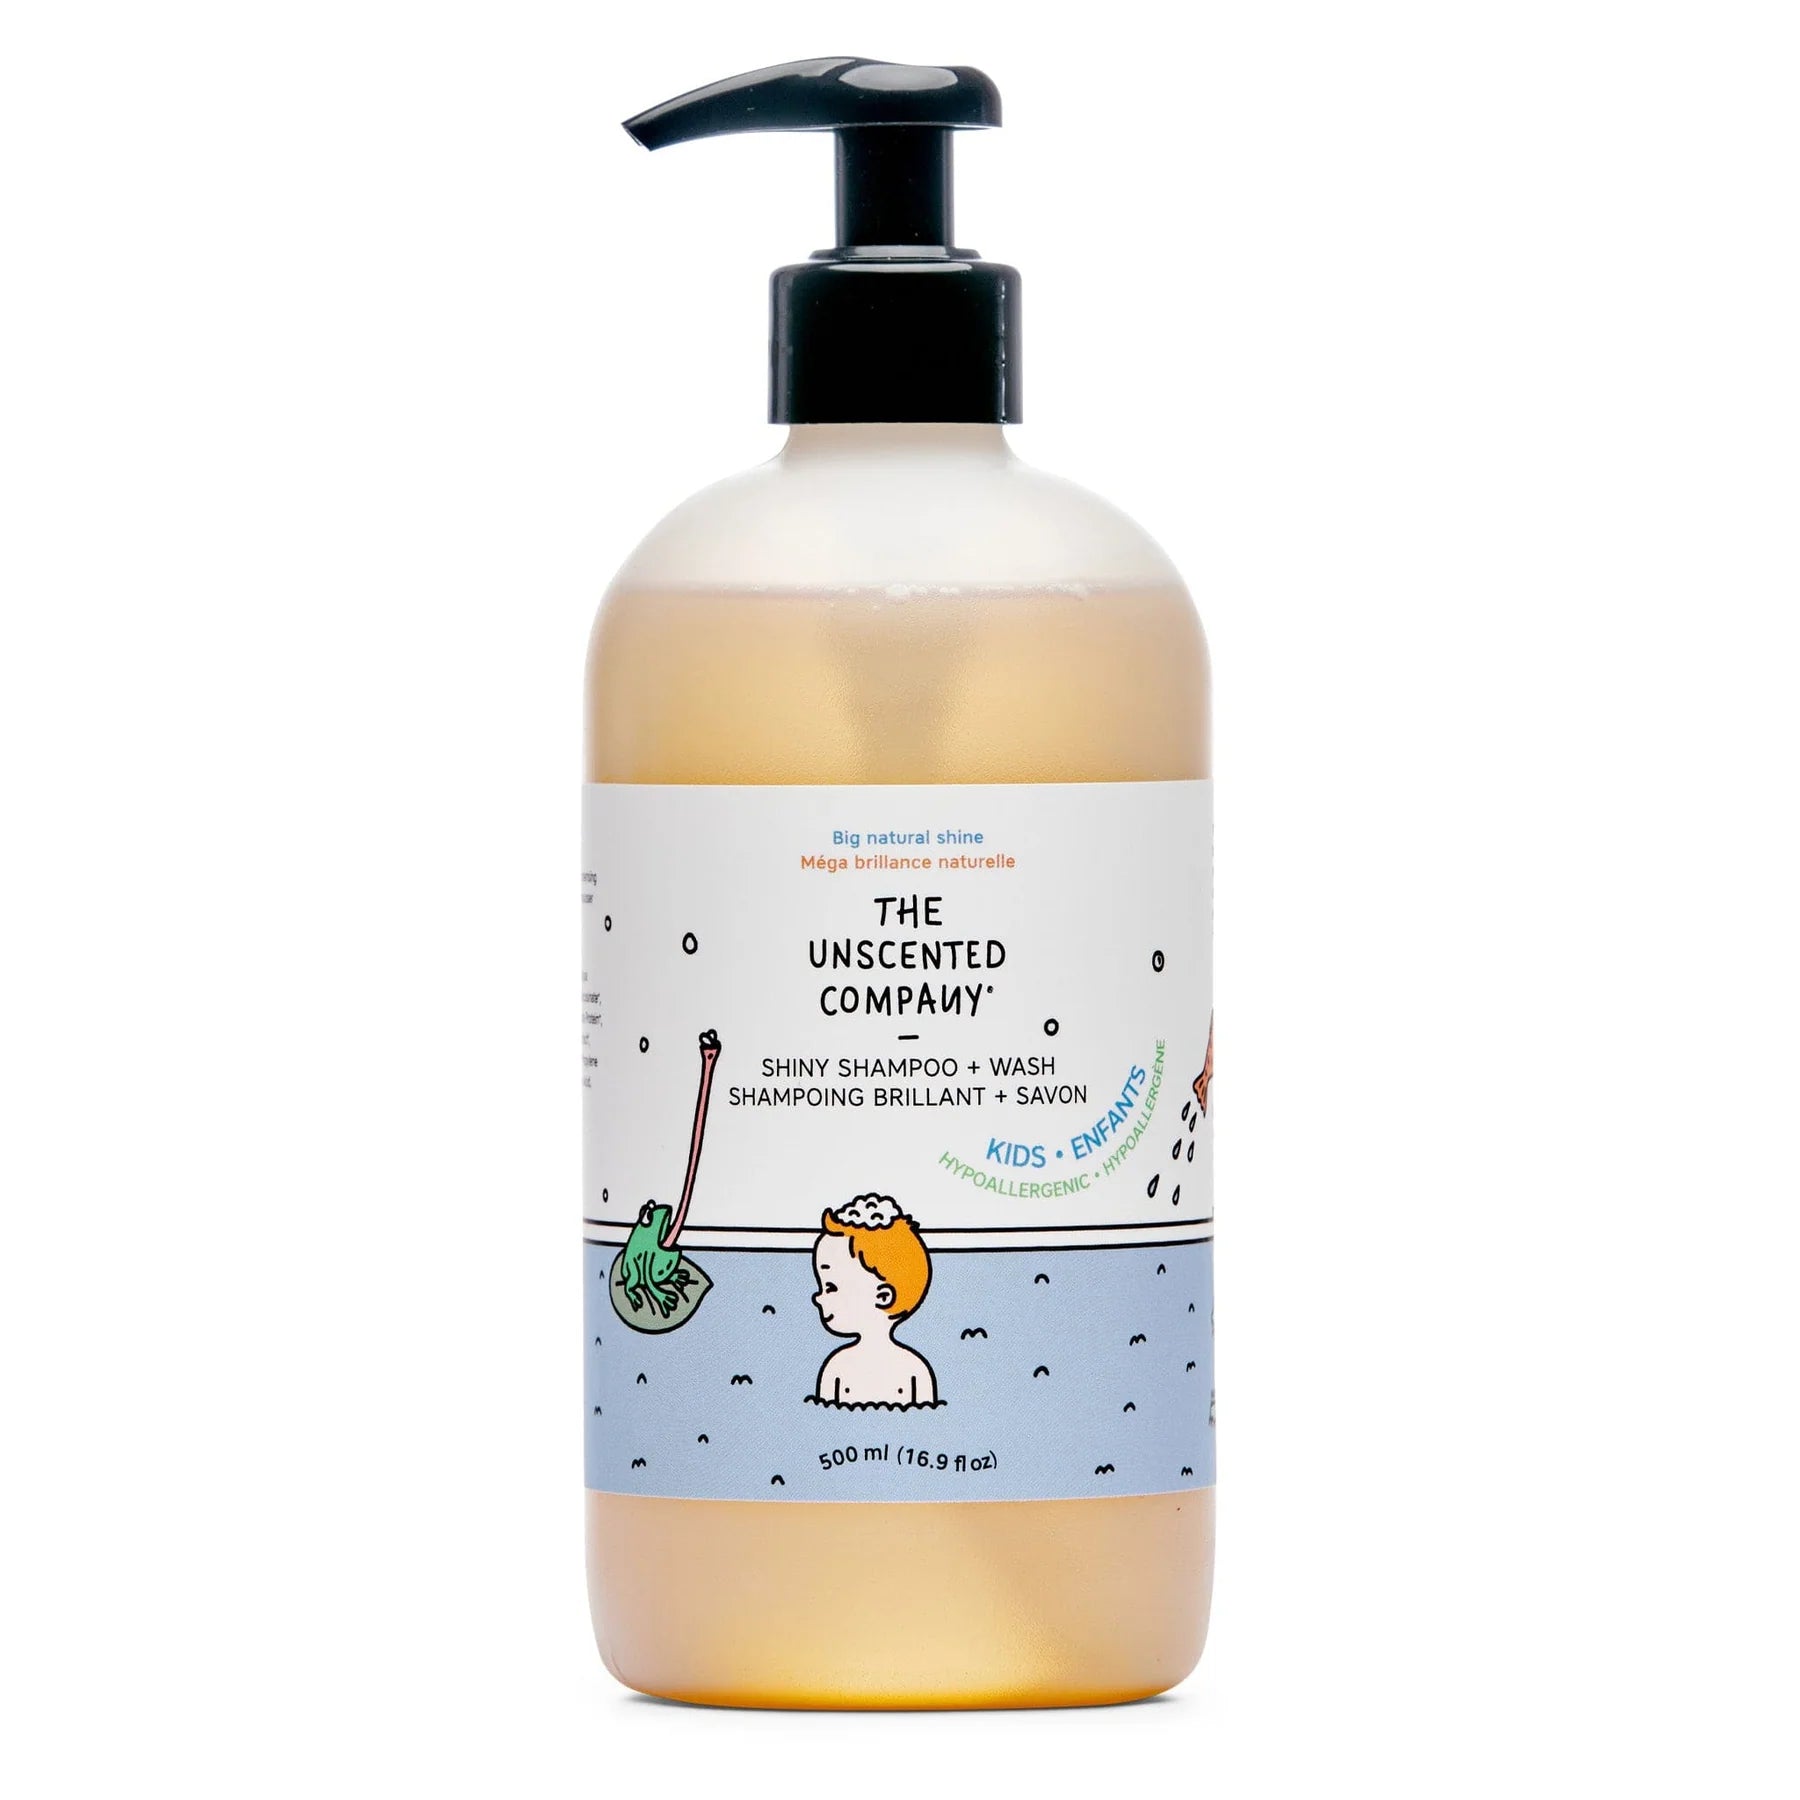 The Unscented Company - Kids Shiny Shampoo - All  Things Being Eco Chilliwack - Natural Kids Shampoo & Wash